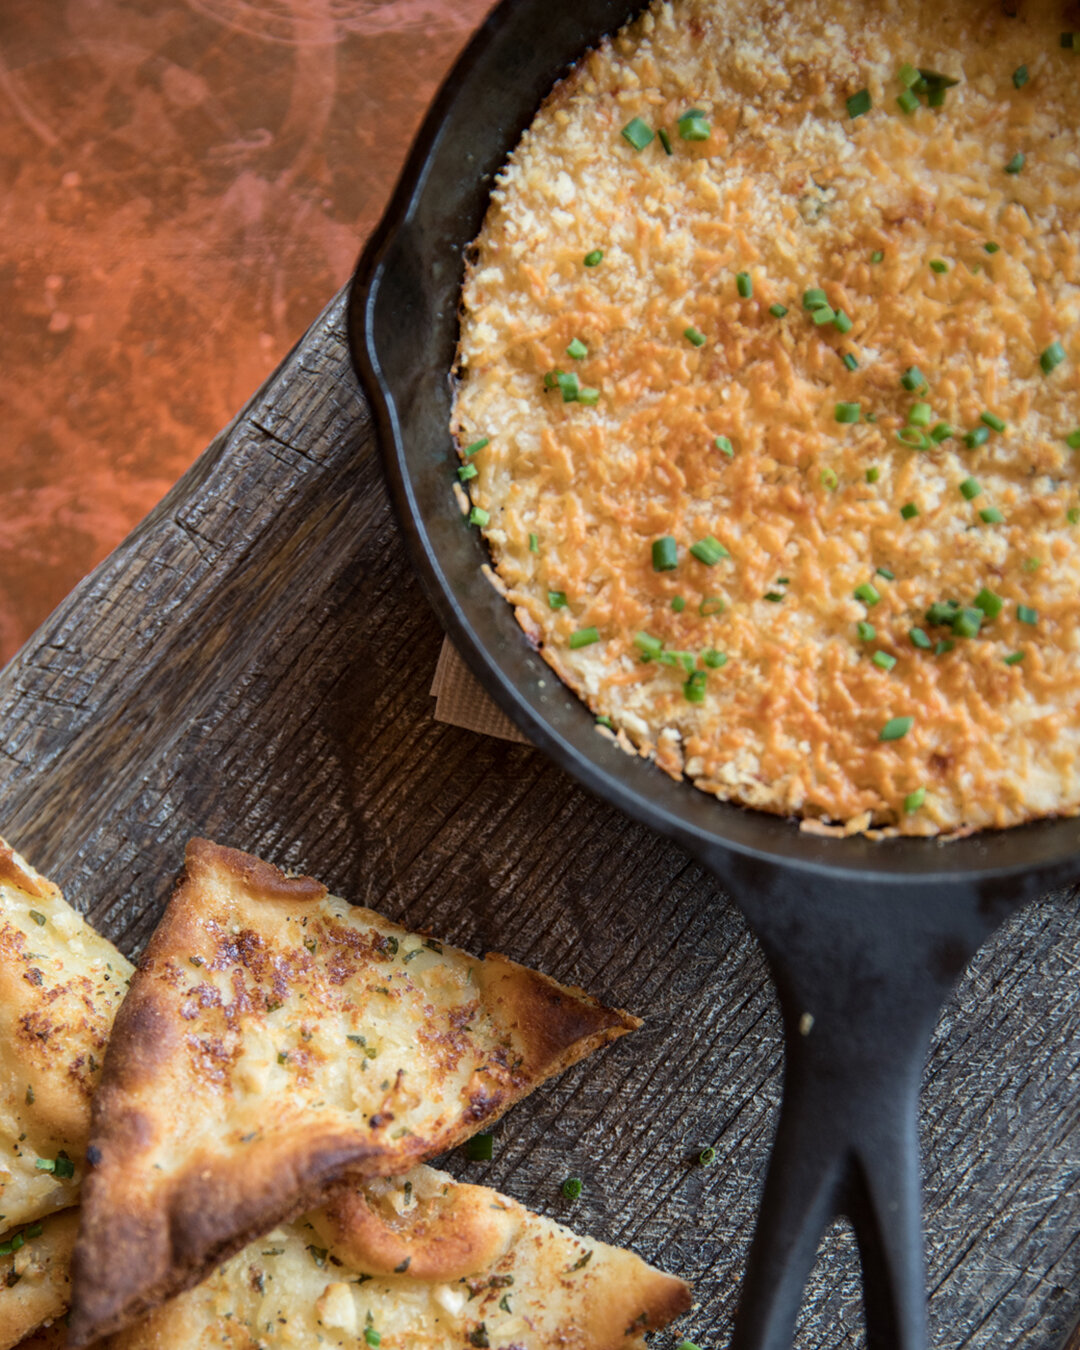 Have you had our Cast Iron Crab &amp; Artichoke Dip? 😍
Roasted peppers, feta, pico de gallo, served w/ corn chips - pure bliss